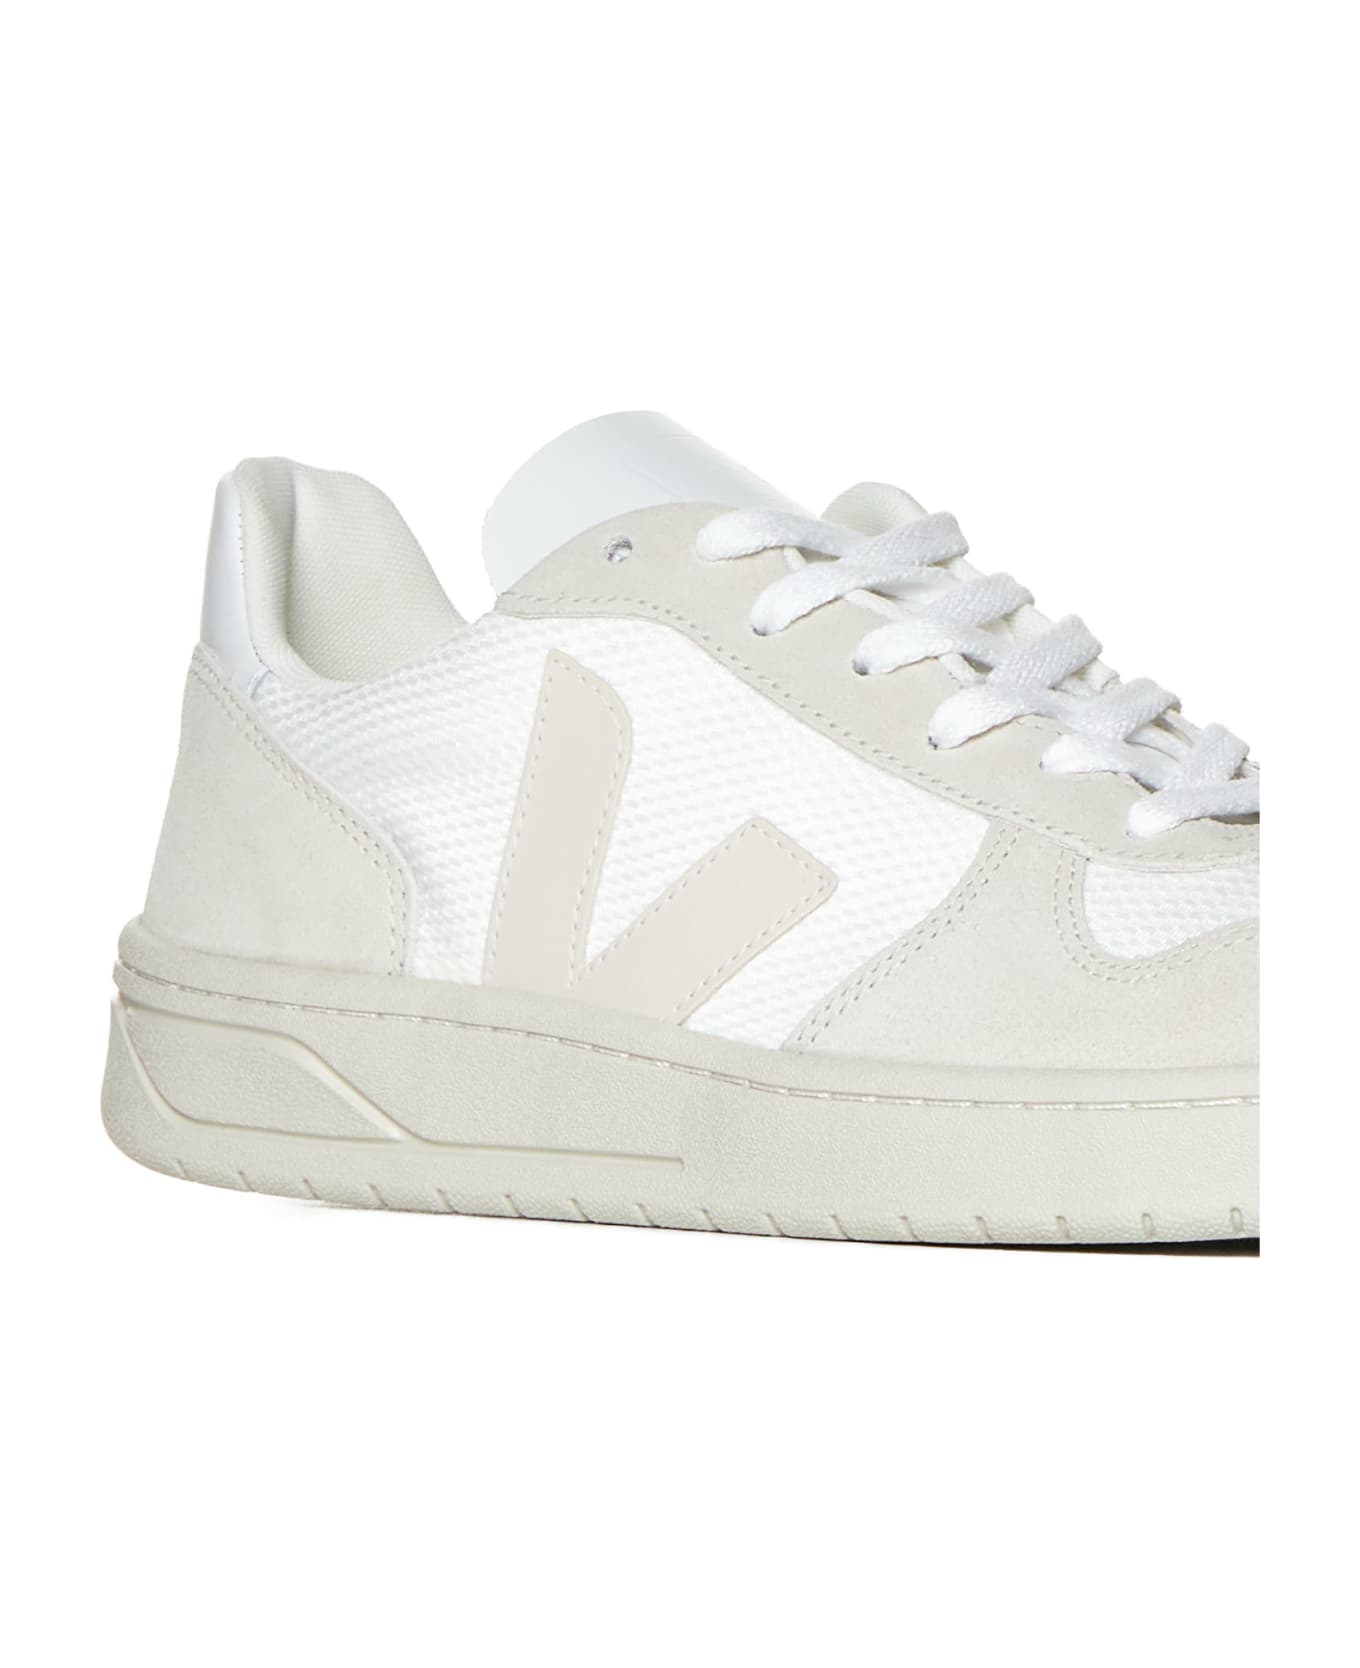 Veja Sneakers - White_natural_pierre スニーカー